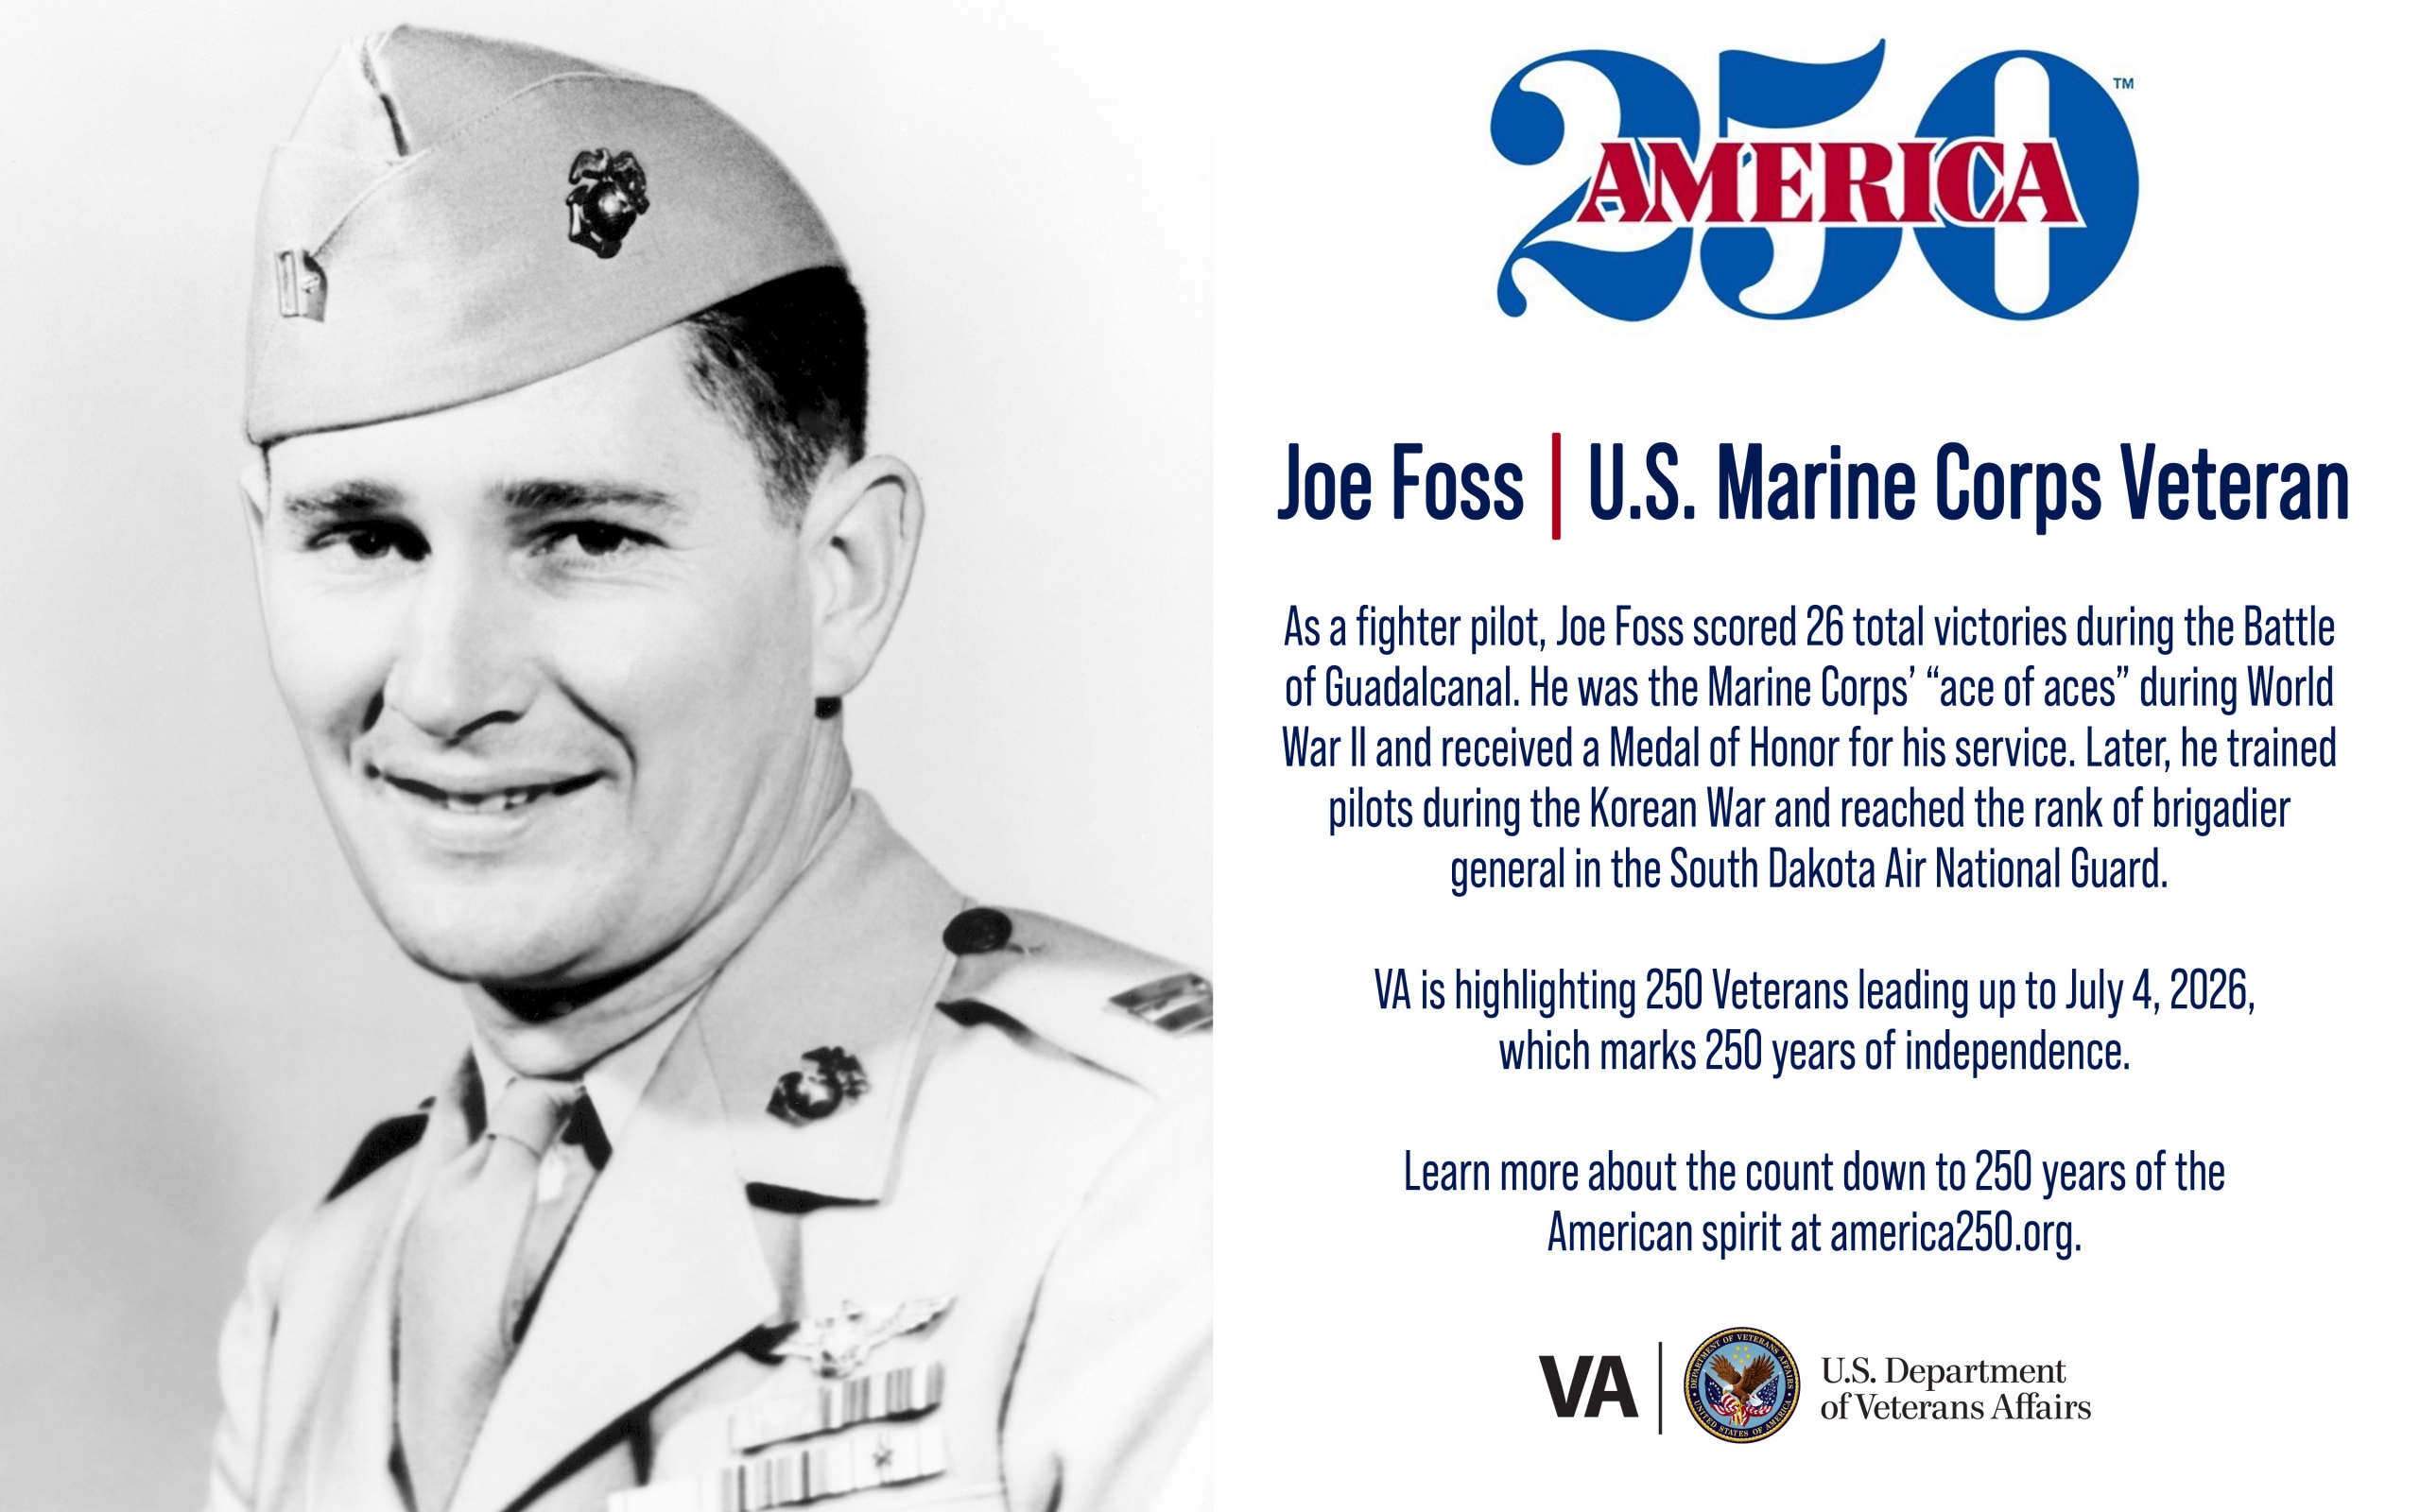 This week’s America250 salute is Marine Corps and Air Force Veteran Joe Foss, who received a Medal of Honor for his actions in Guadalcanal.